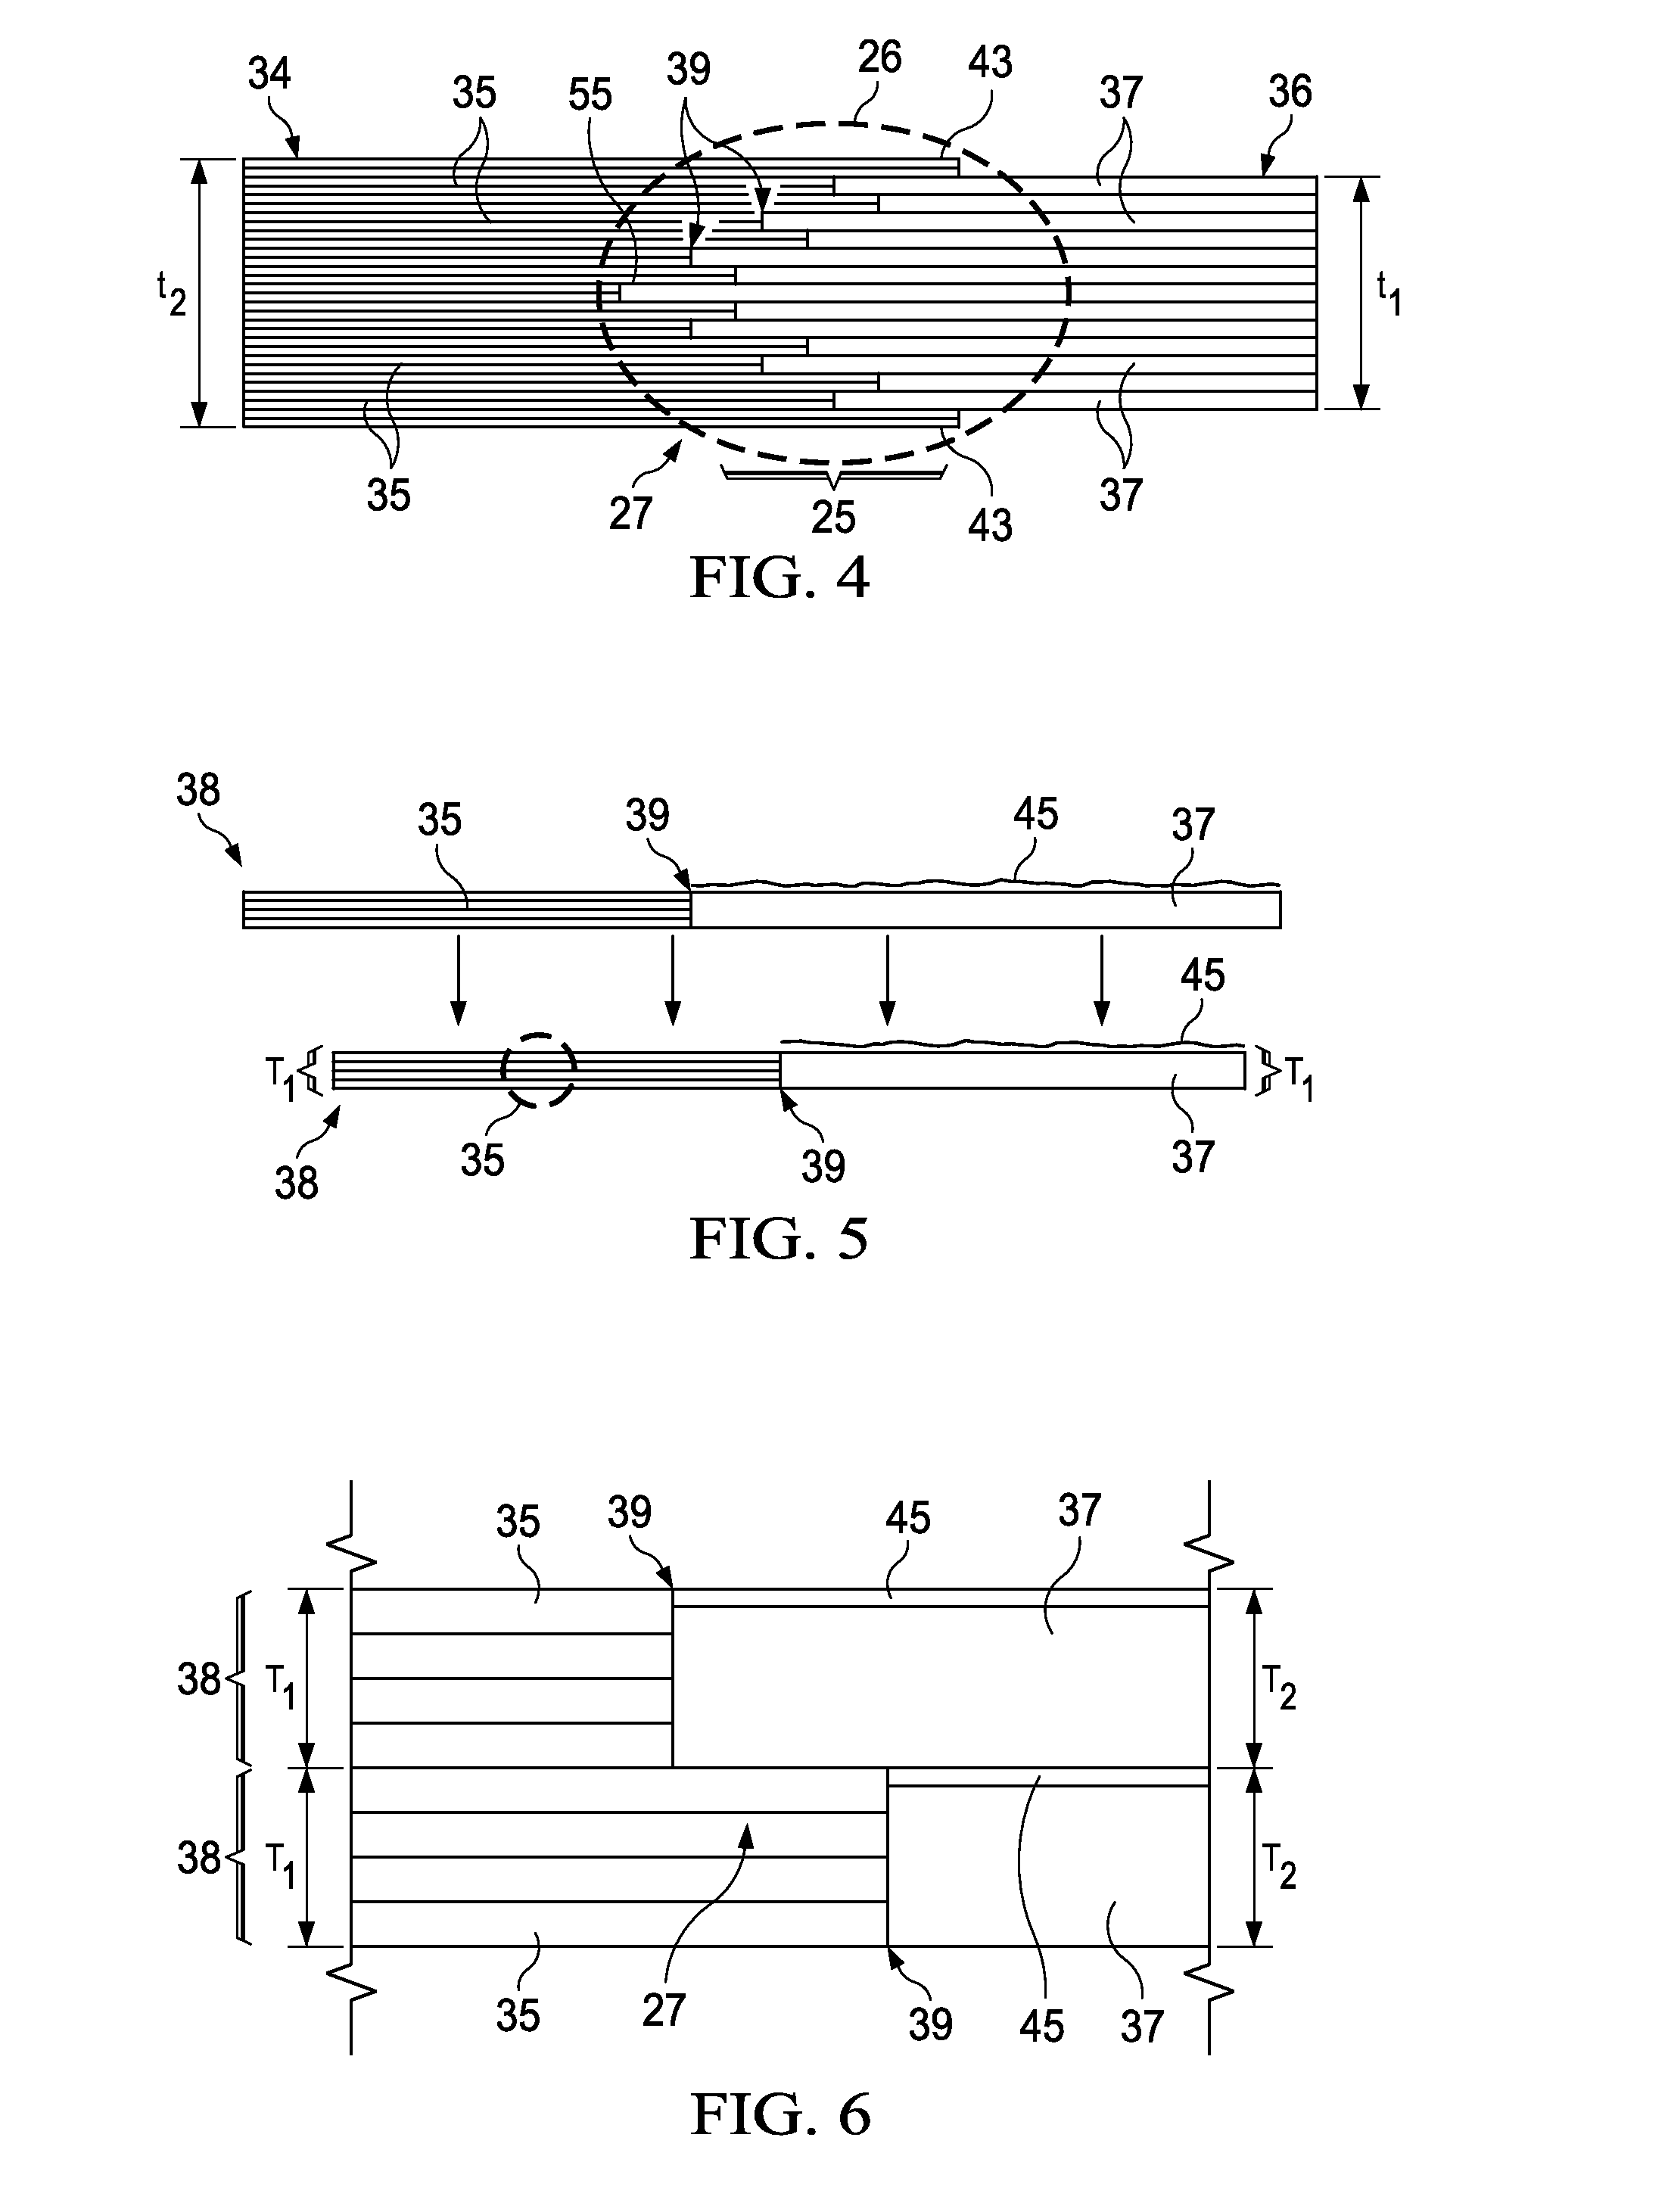 Multi-Layer Metallic Structure and Composite-to-Metal Joint Methods